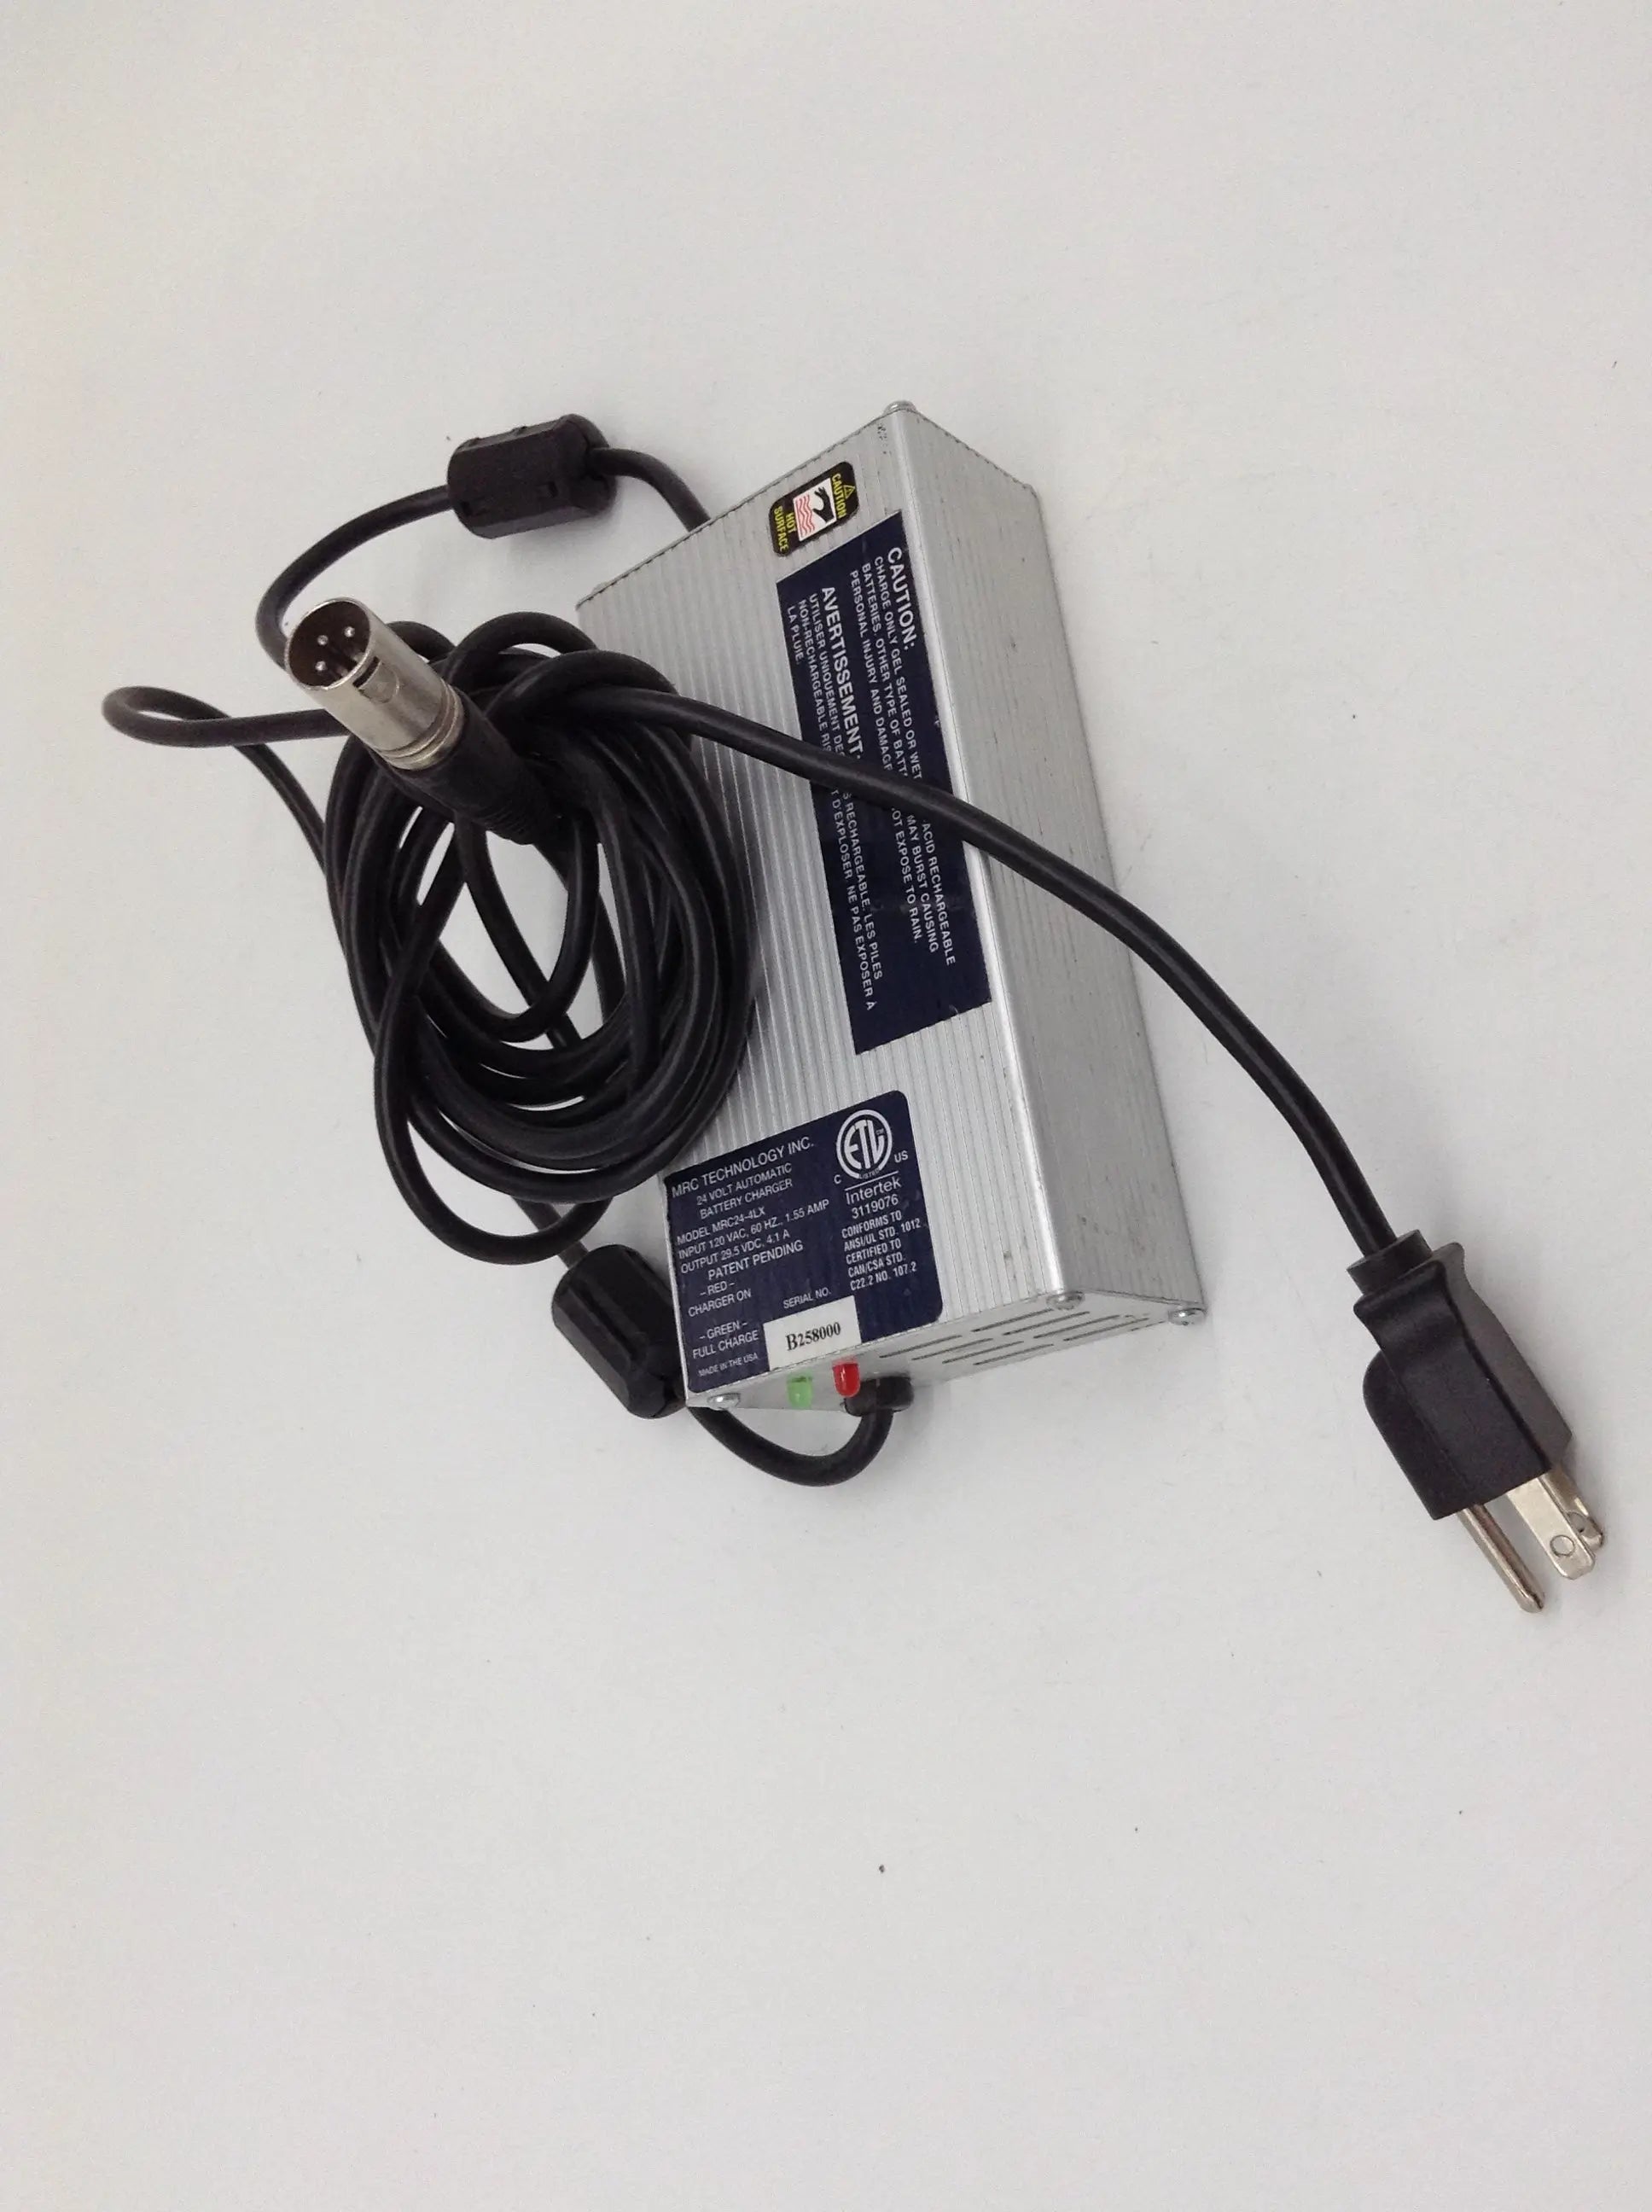 Load image into Gallery viewer, A Biomedical Service MRC Technology Inc. 24v Scooter/Wheelchair Battery Charger MRC24-4LX 3 Pin 80.00